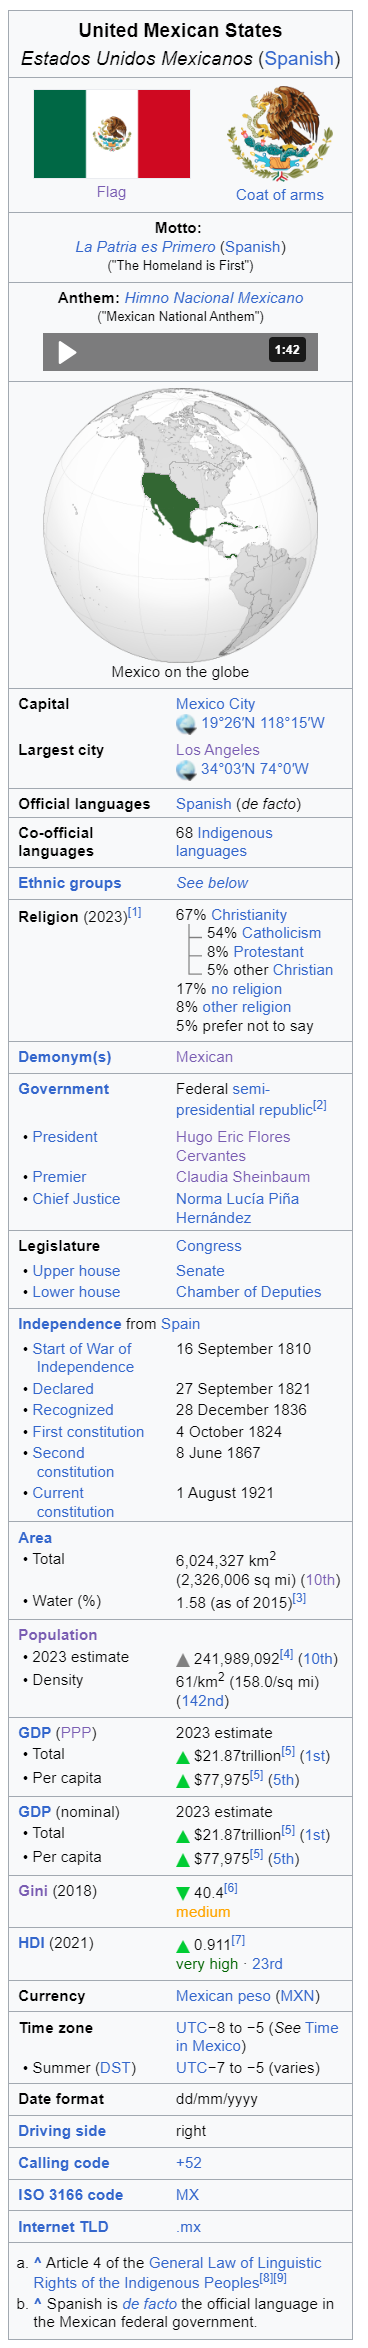 United Mexican States.png